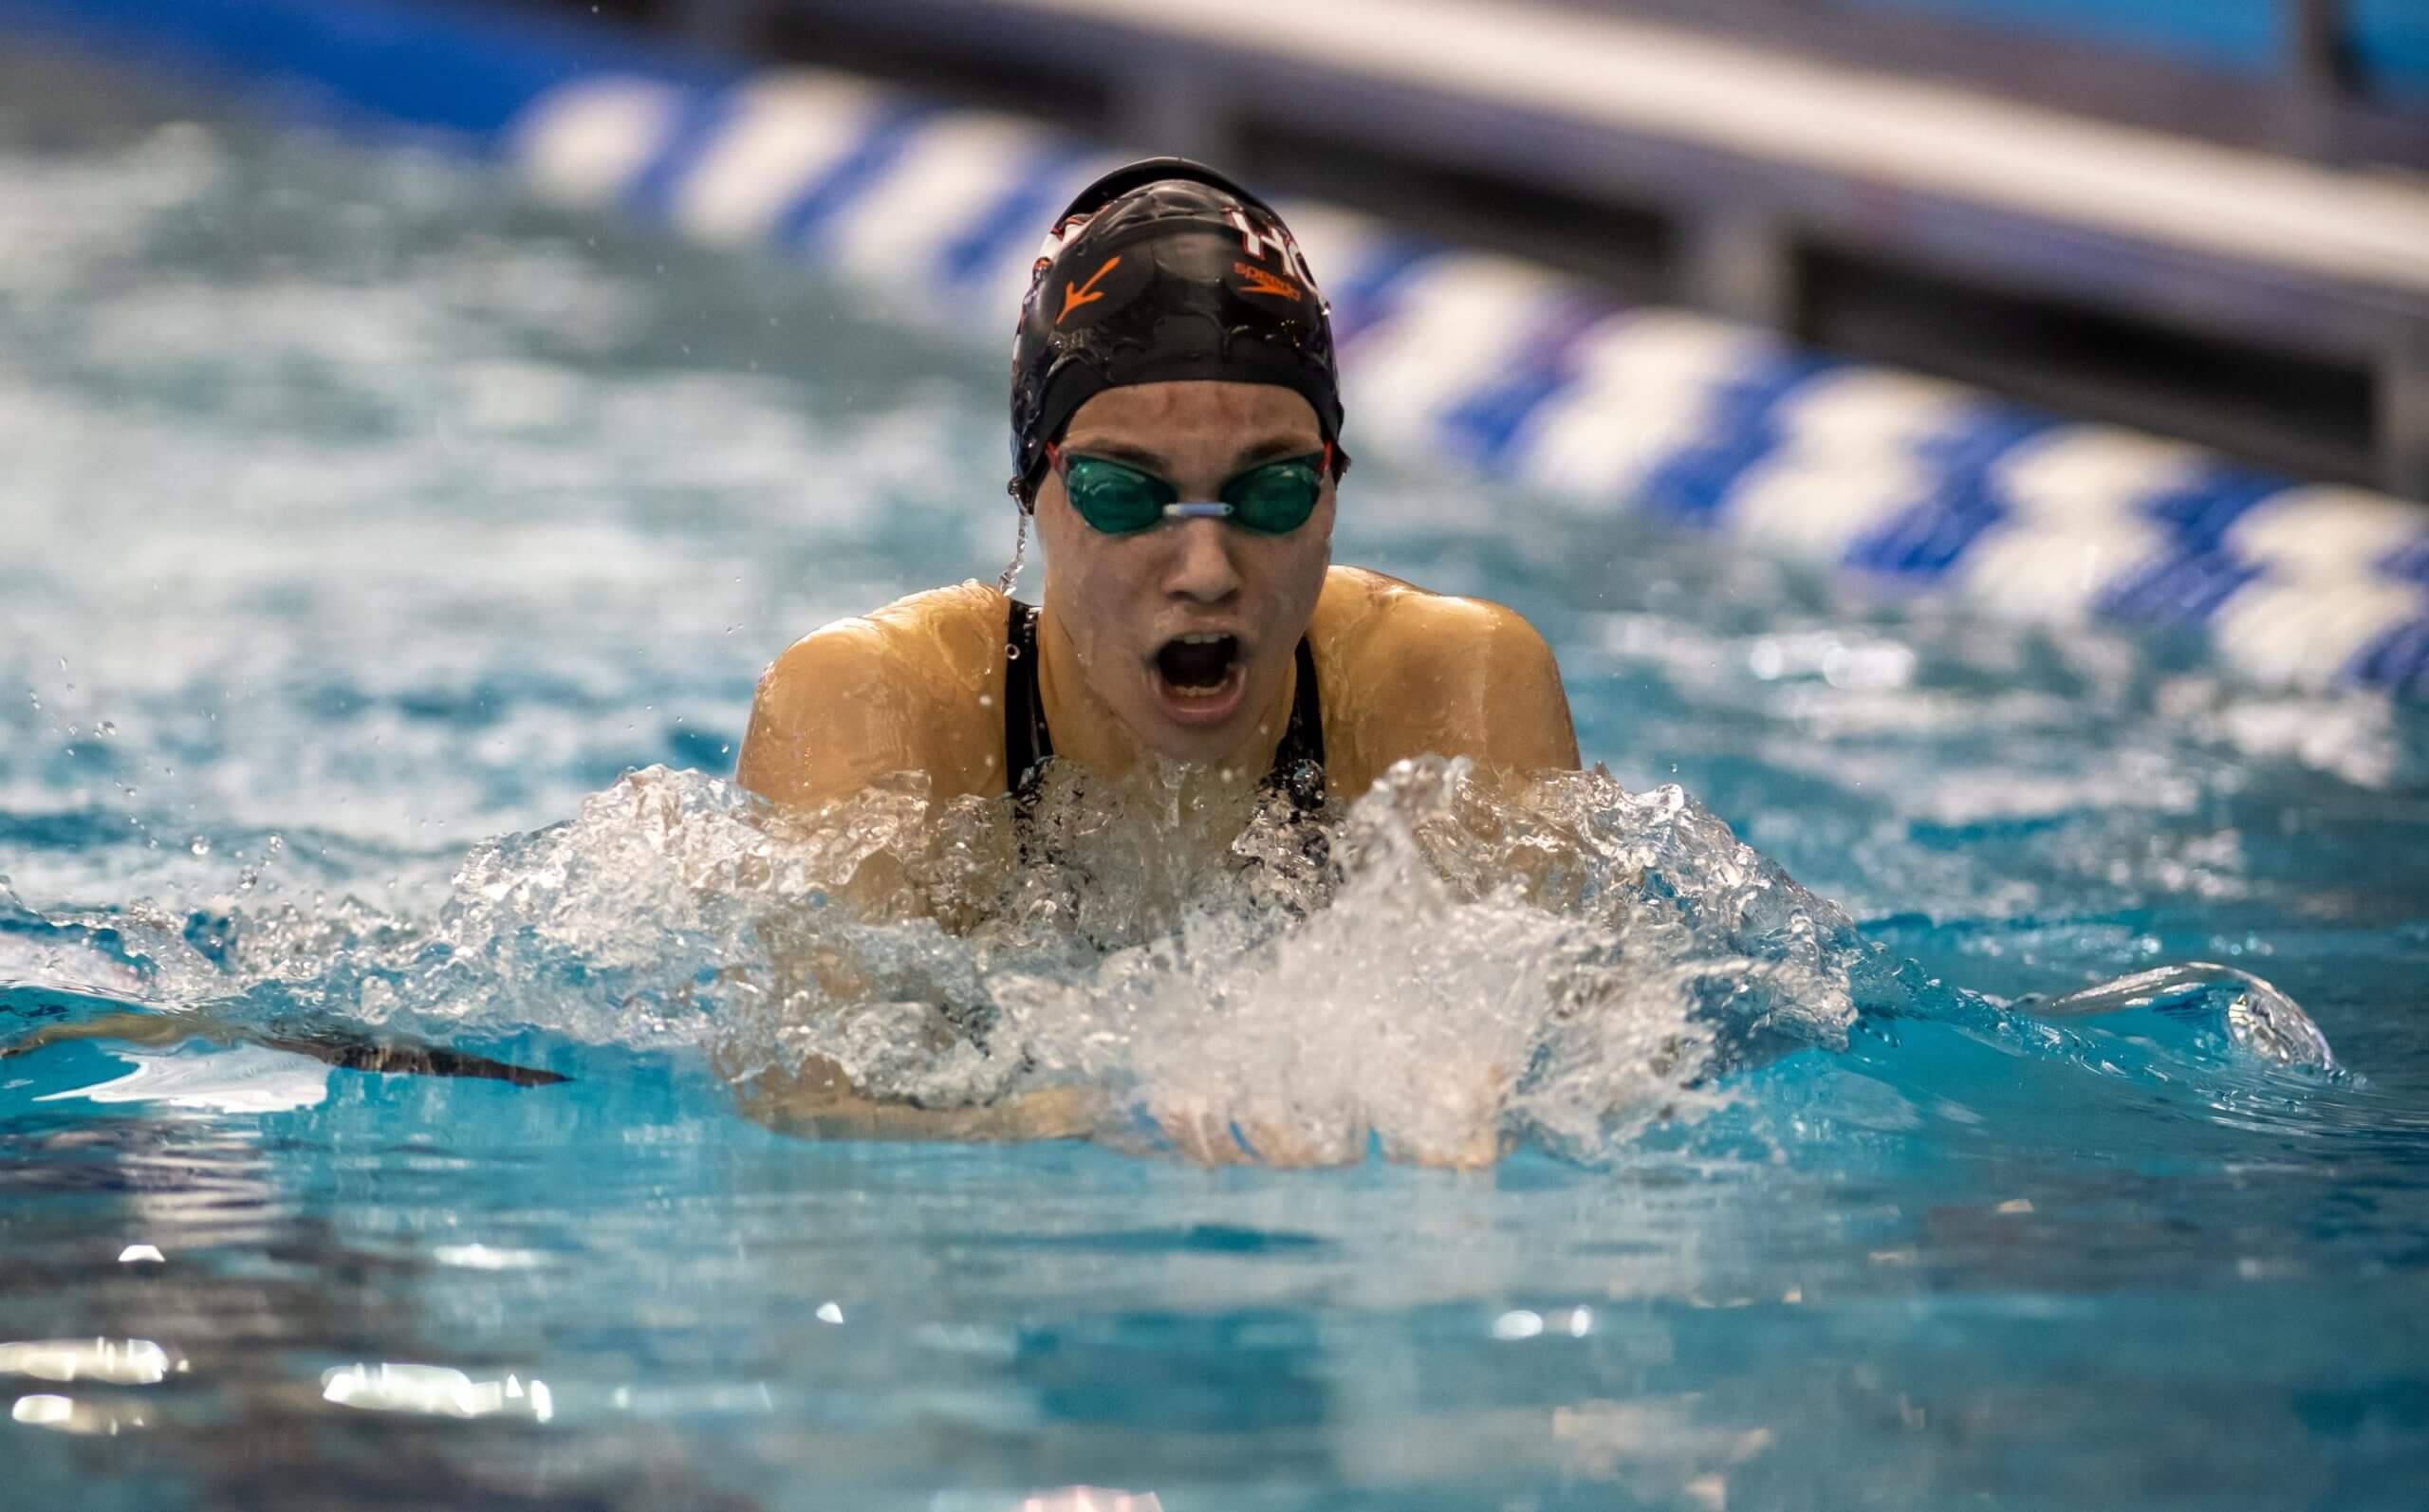 Herbet swims into the record books during freshman year